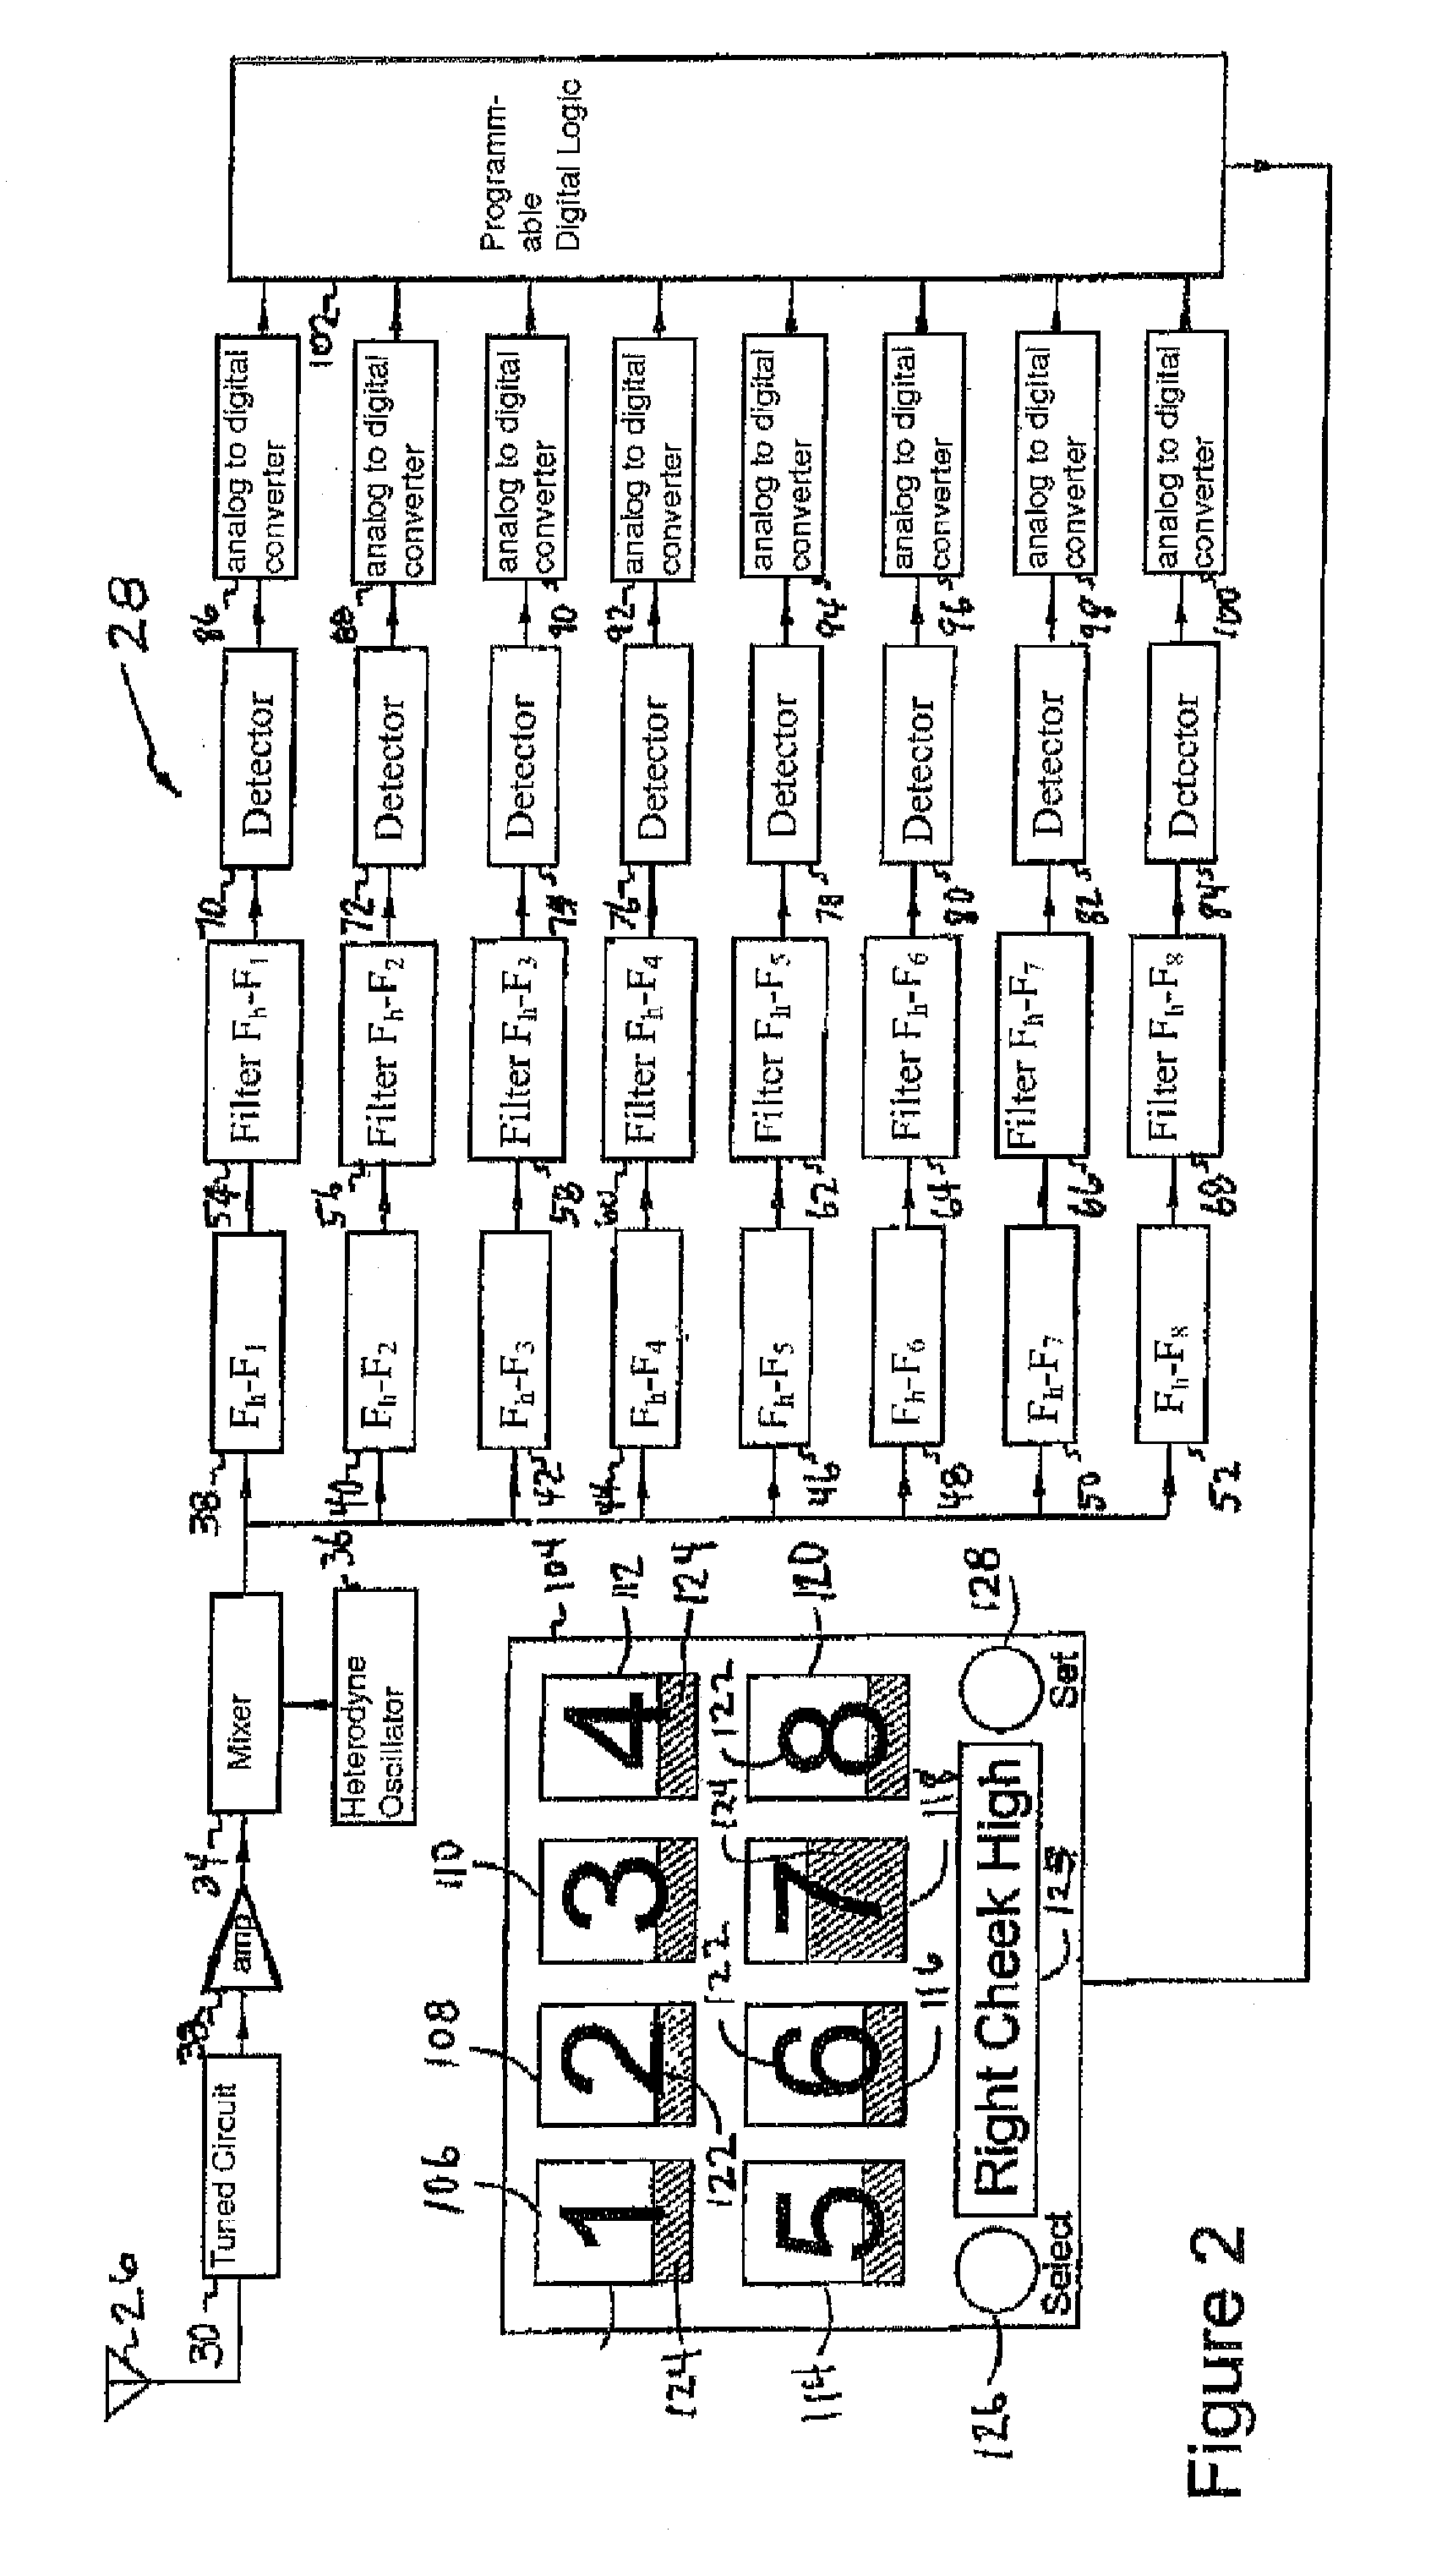 System and method for facial nerve monitoring during facial surgery